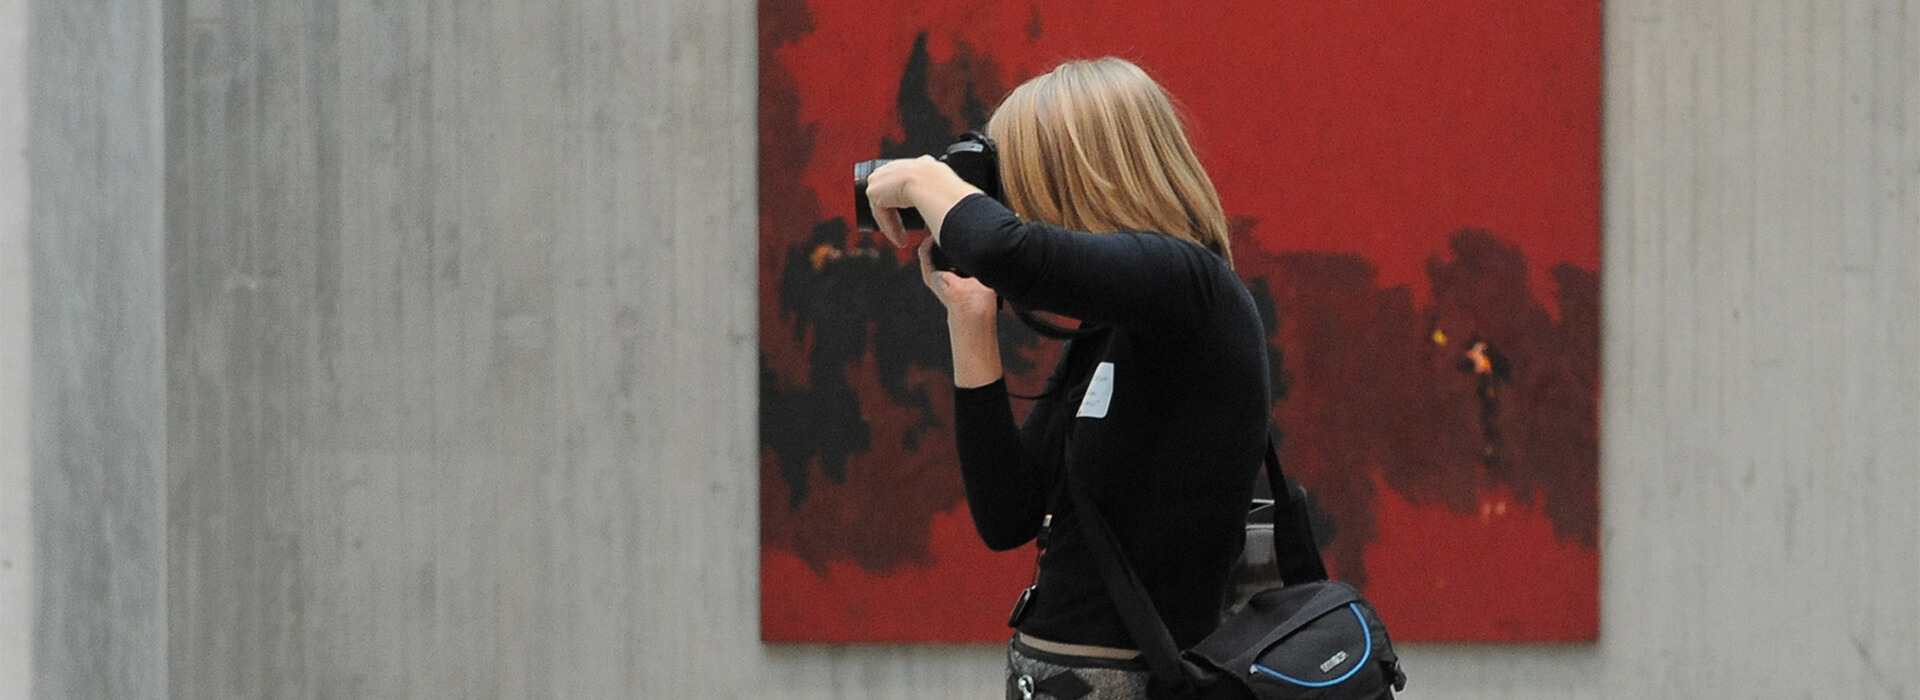 Woman takes a photo in front of a red painting